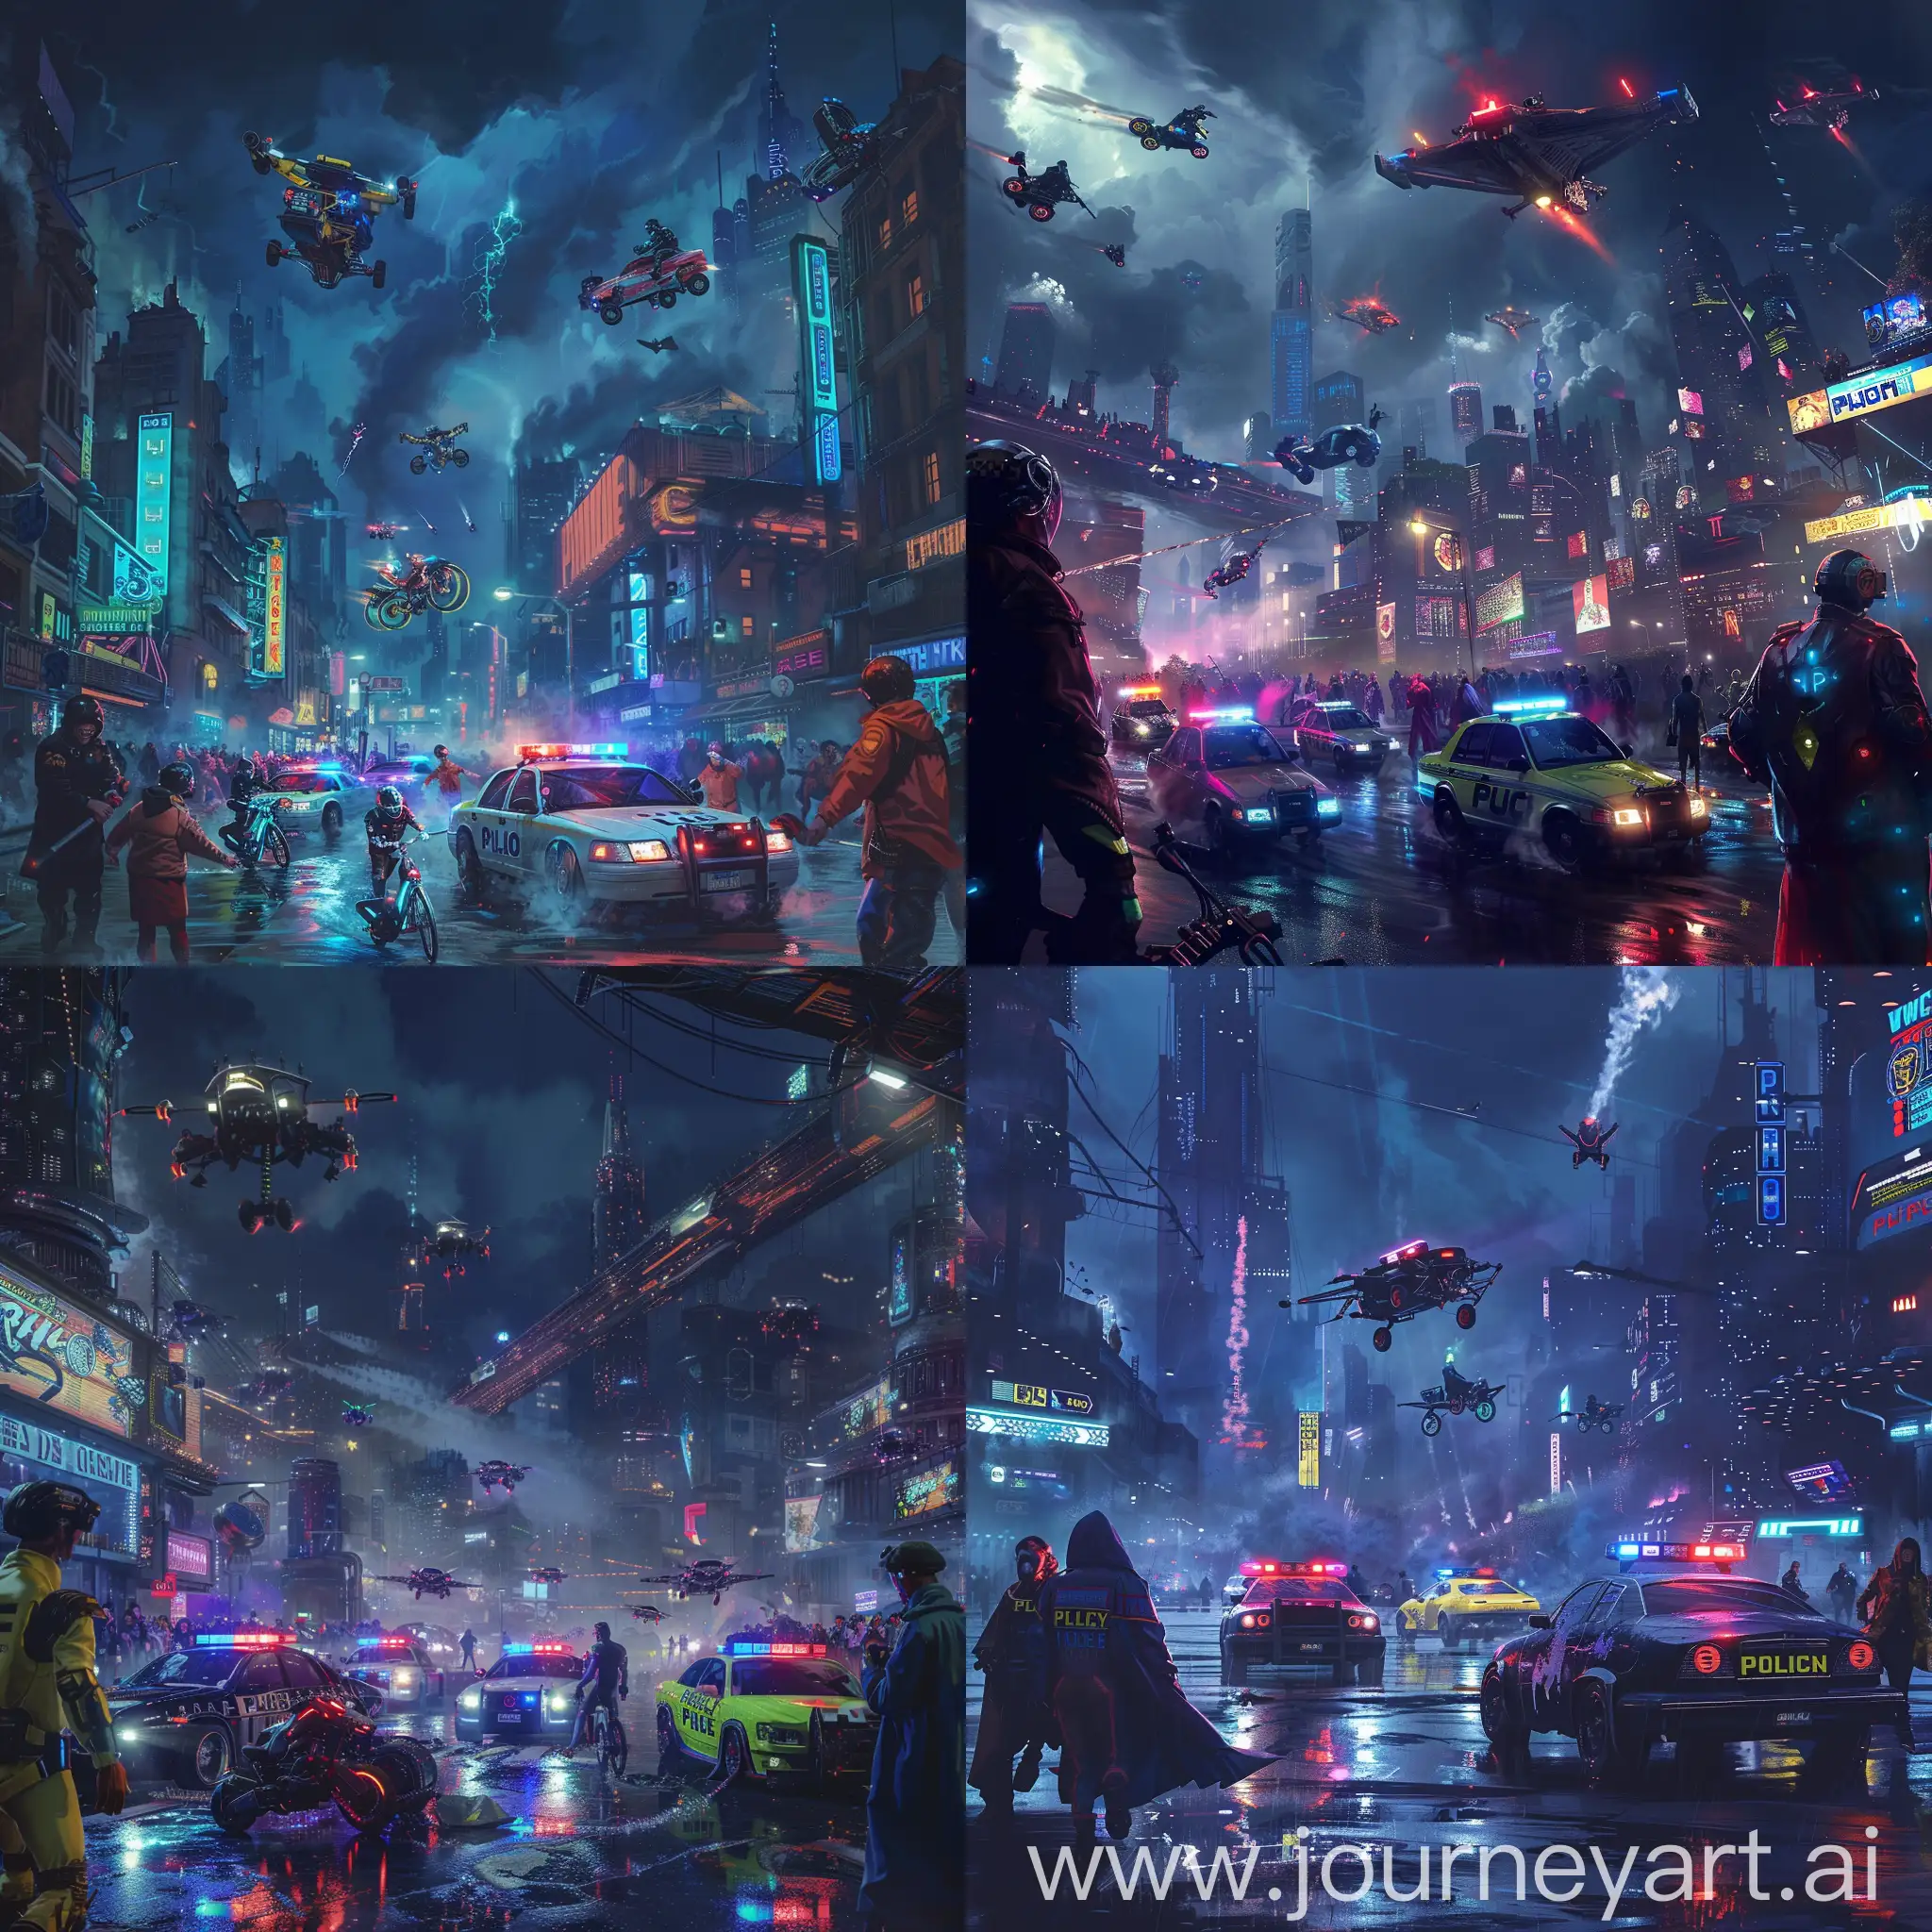 Cyberpunk city, dark sky, people dressed in neon colored clothing, futuristic police cars chasing flying bikes